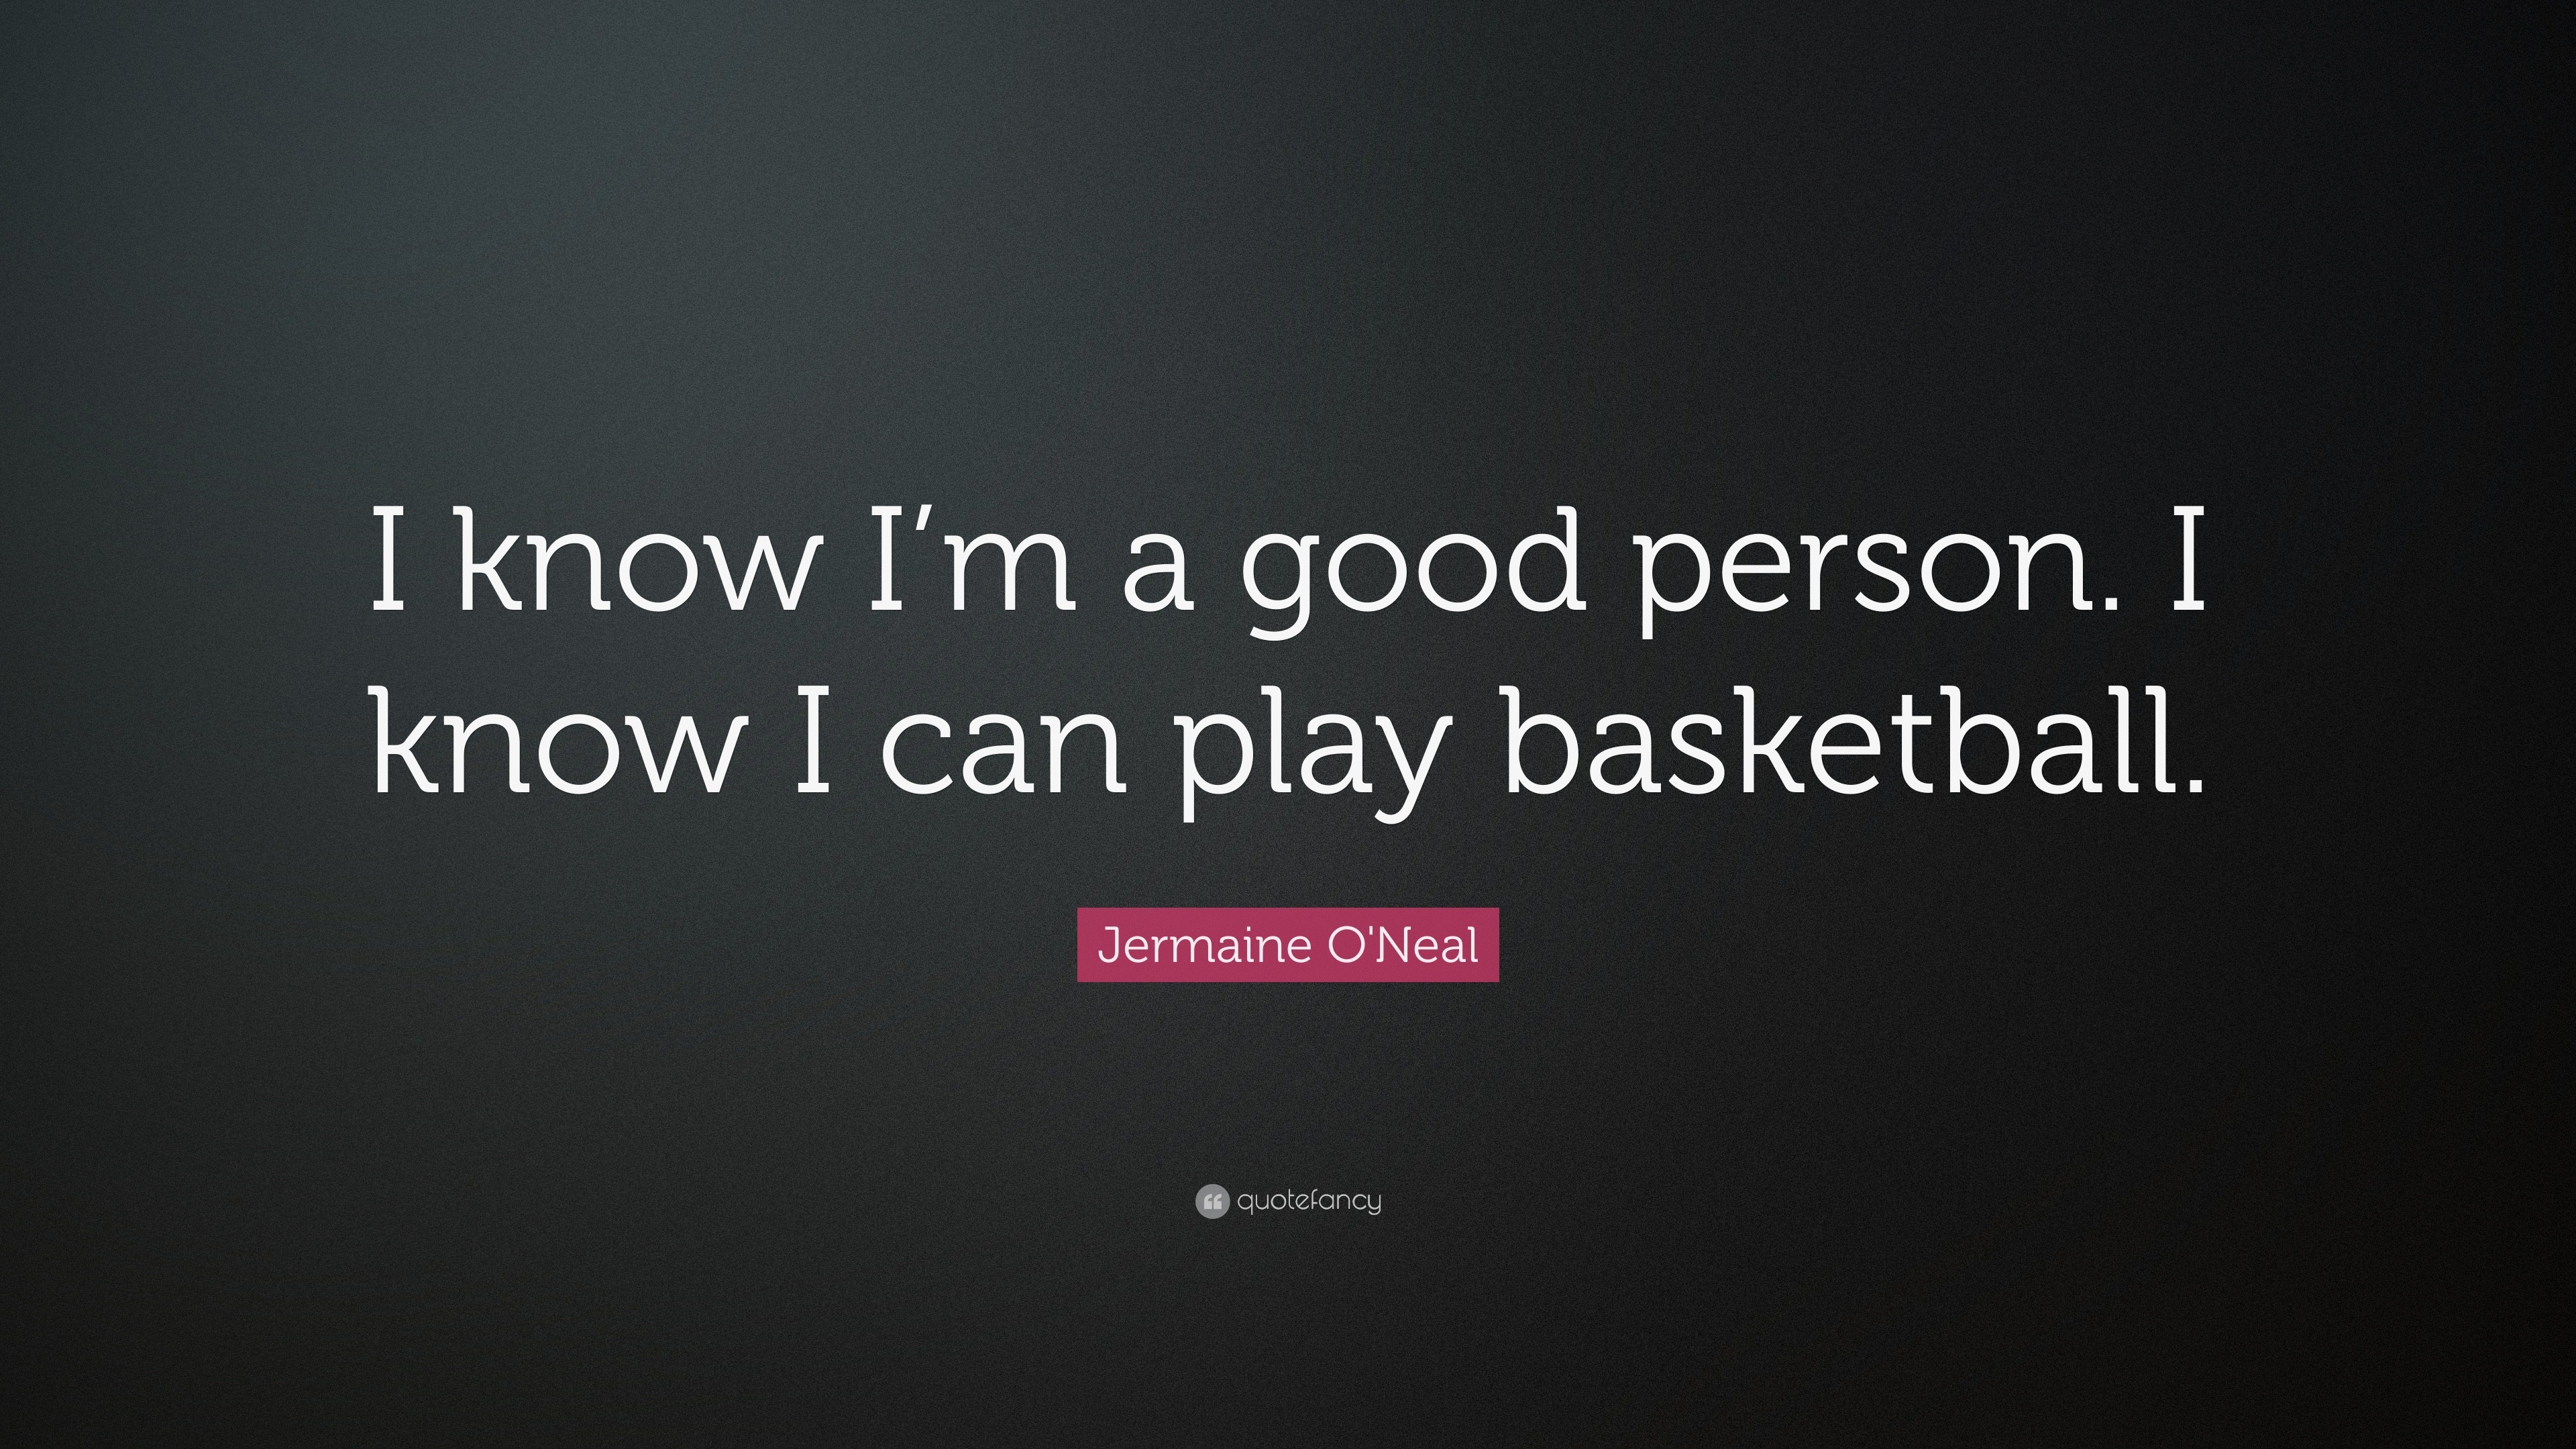 Top 10 Jermaine O'Neal Quotes (2023 Update) - Quotefancy